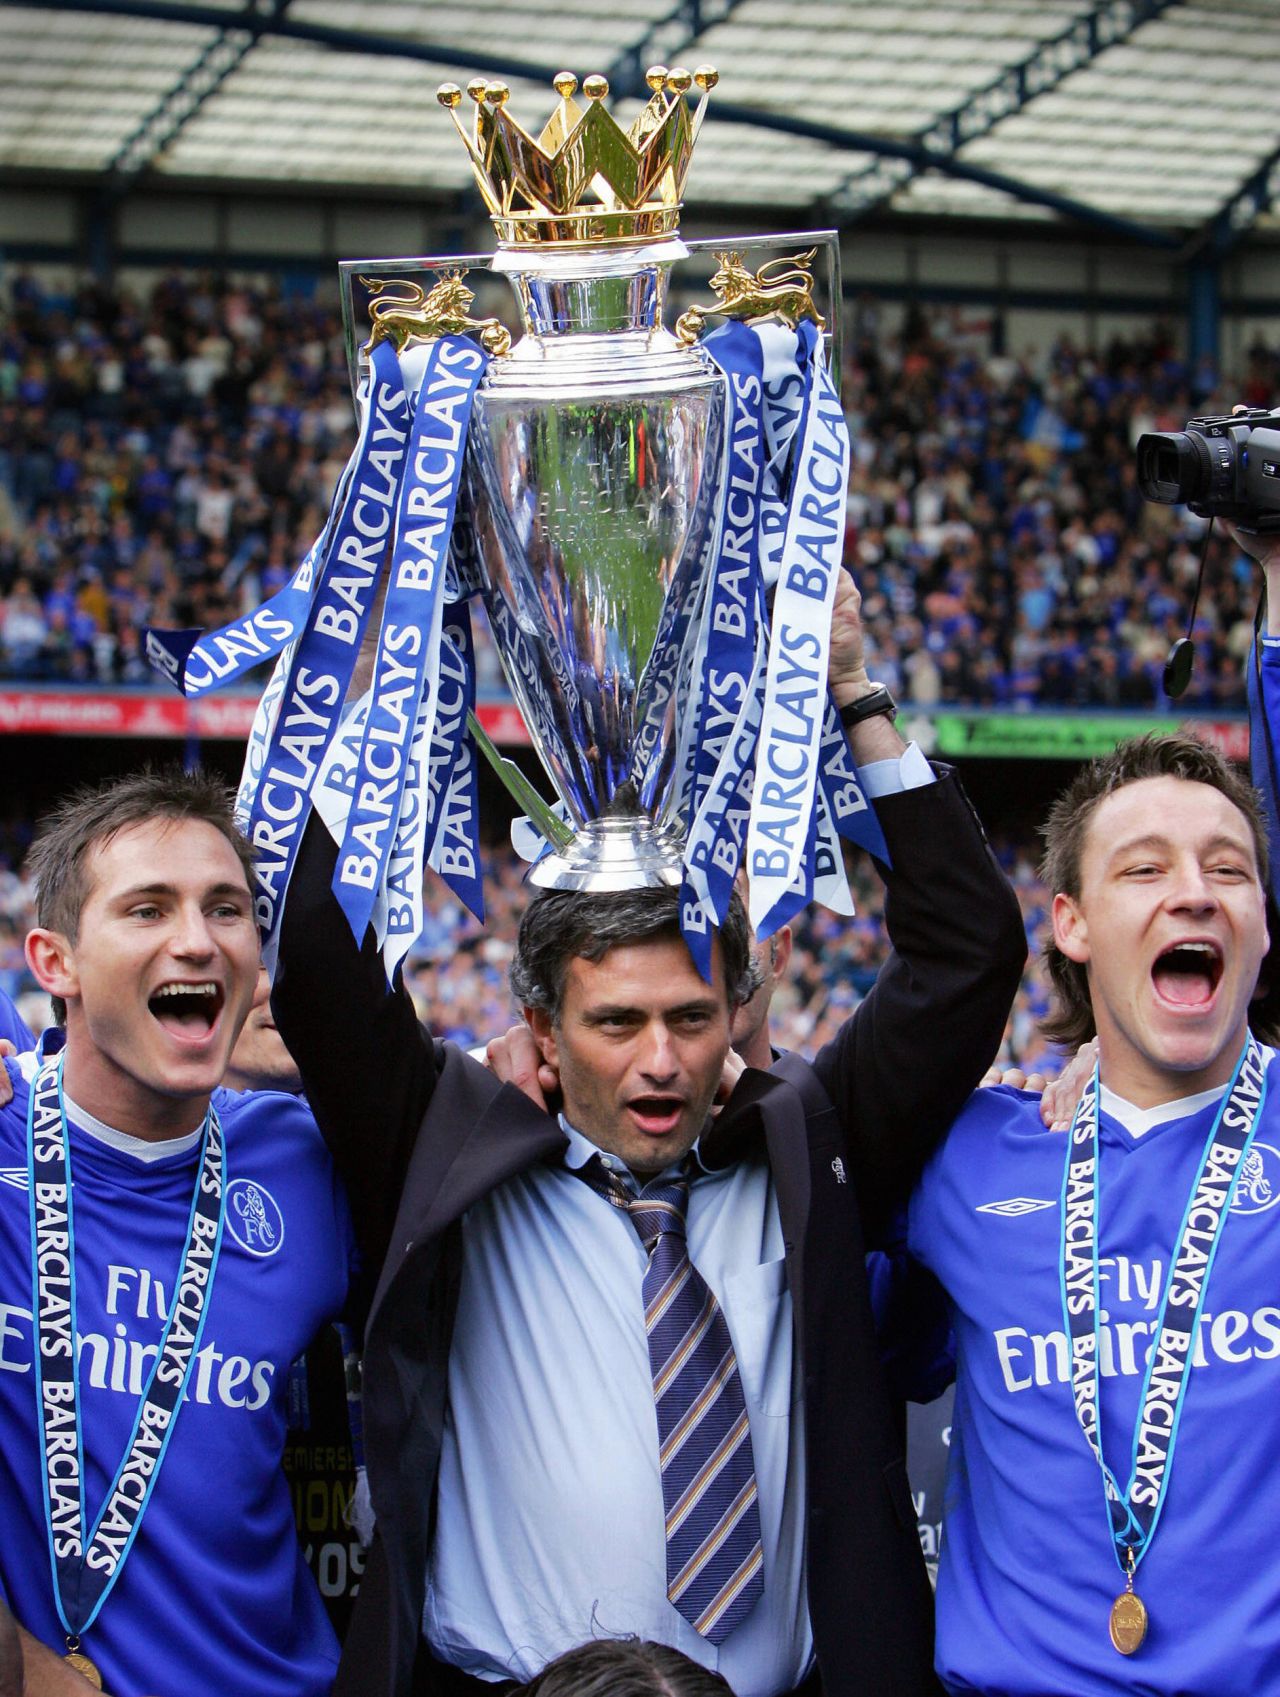 Mourinho left Porto after their European success and first joined Chelsea in June 2004, declaring at his inaugural press conference: "I am a special one." He led the club to their first English league title in over 50 years in his first season at Stamford Bridge. Frank Lampard (L) and John Terry were two of his most trusted players. He left in September 2007 after winning five major trophies.